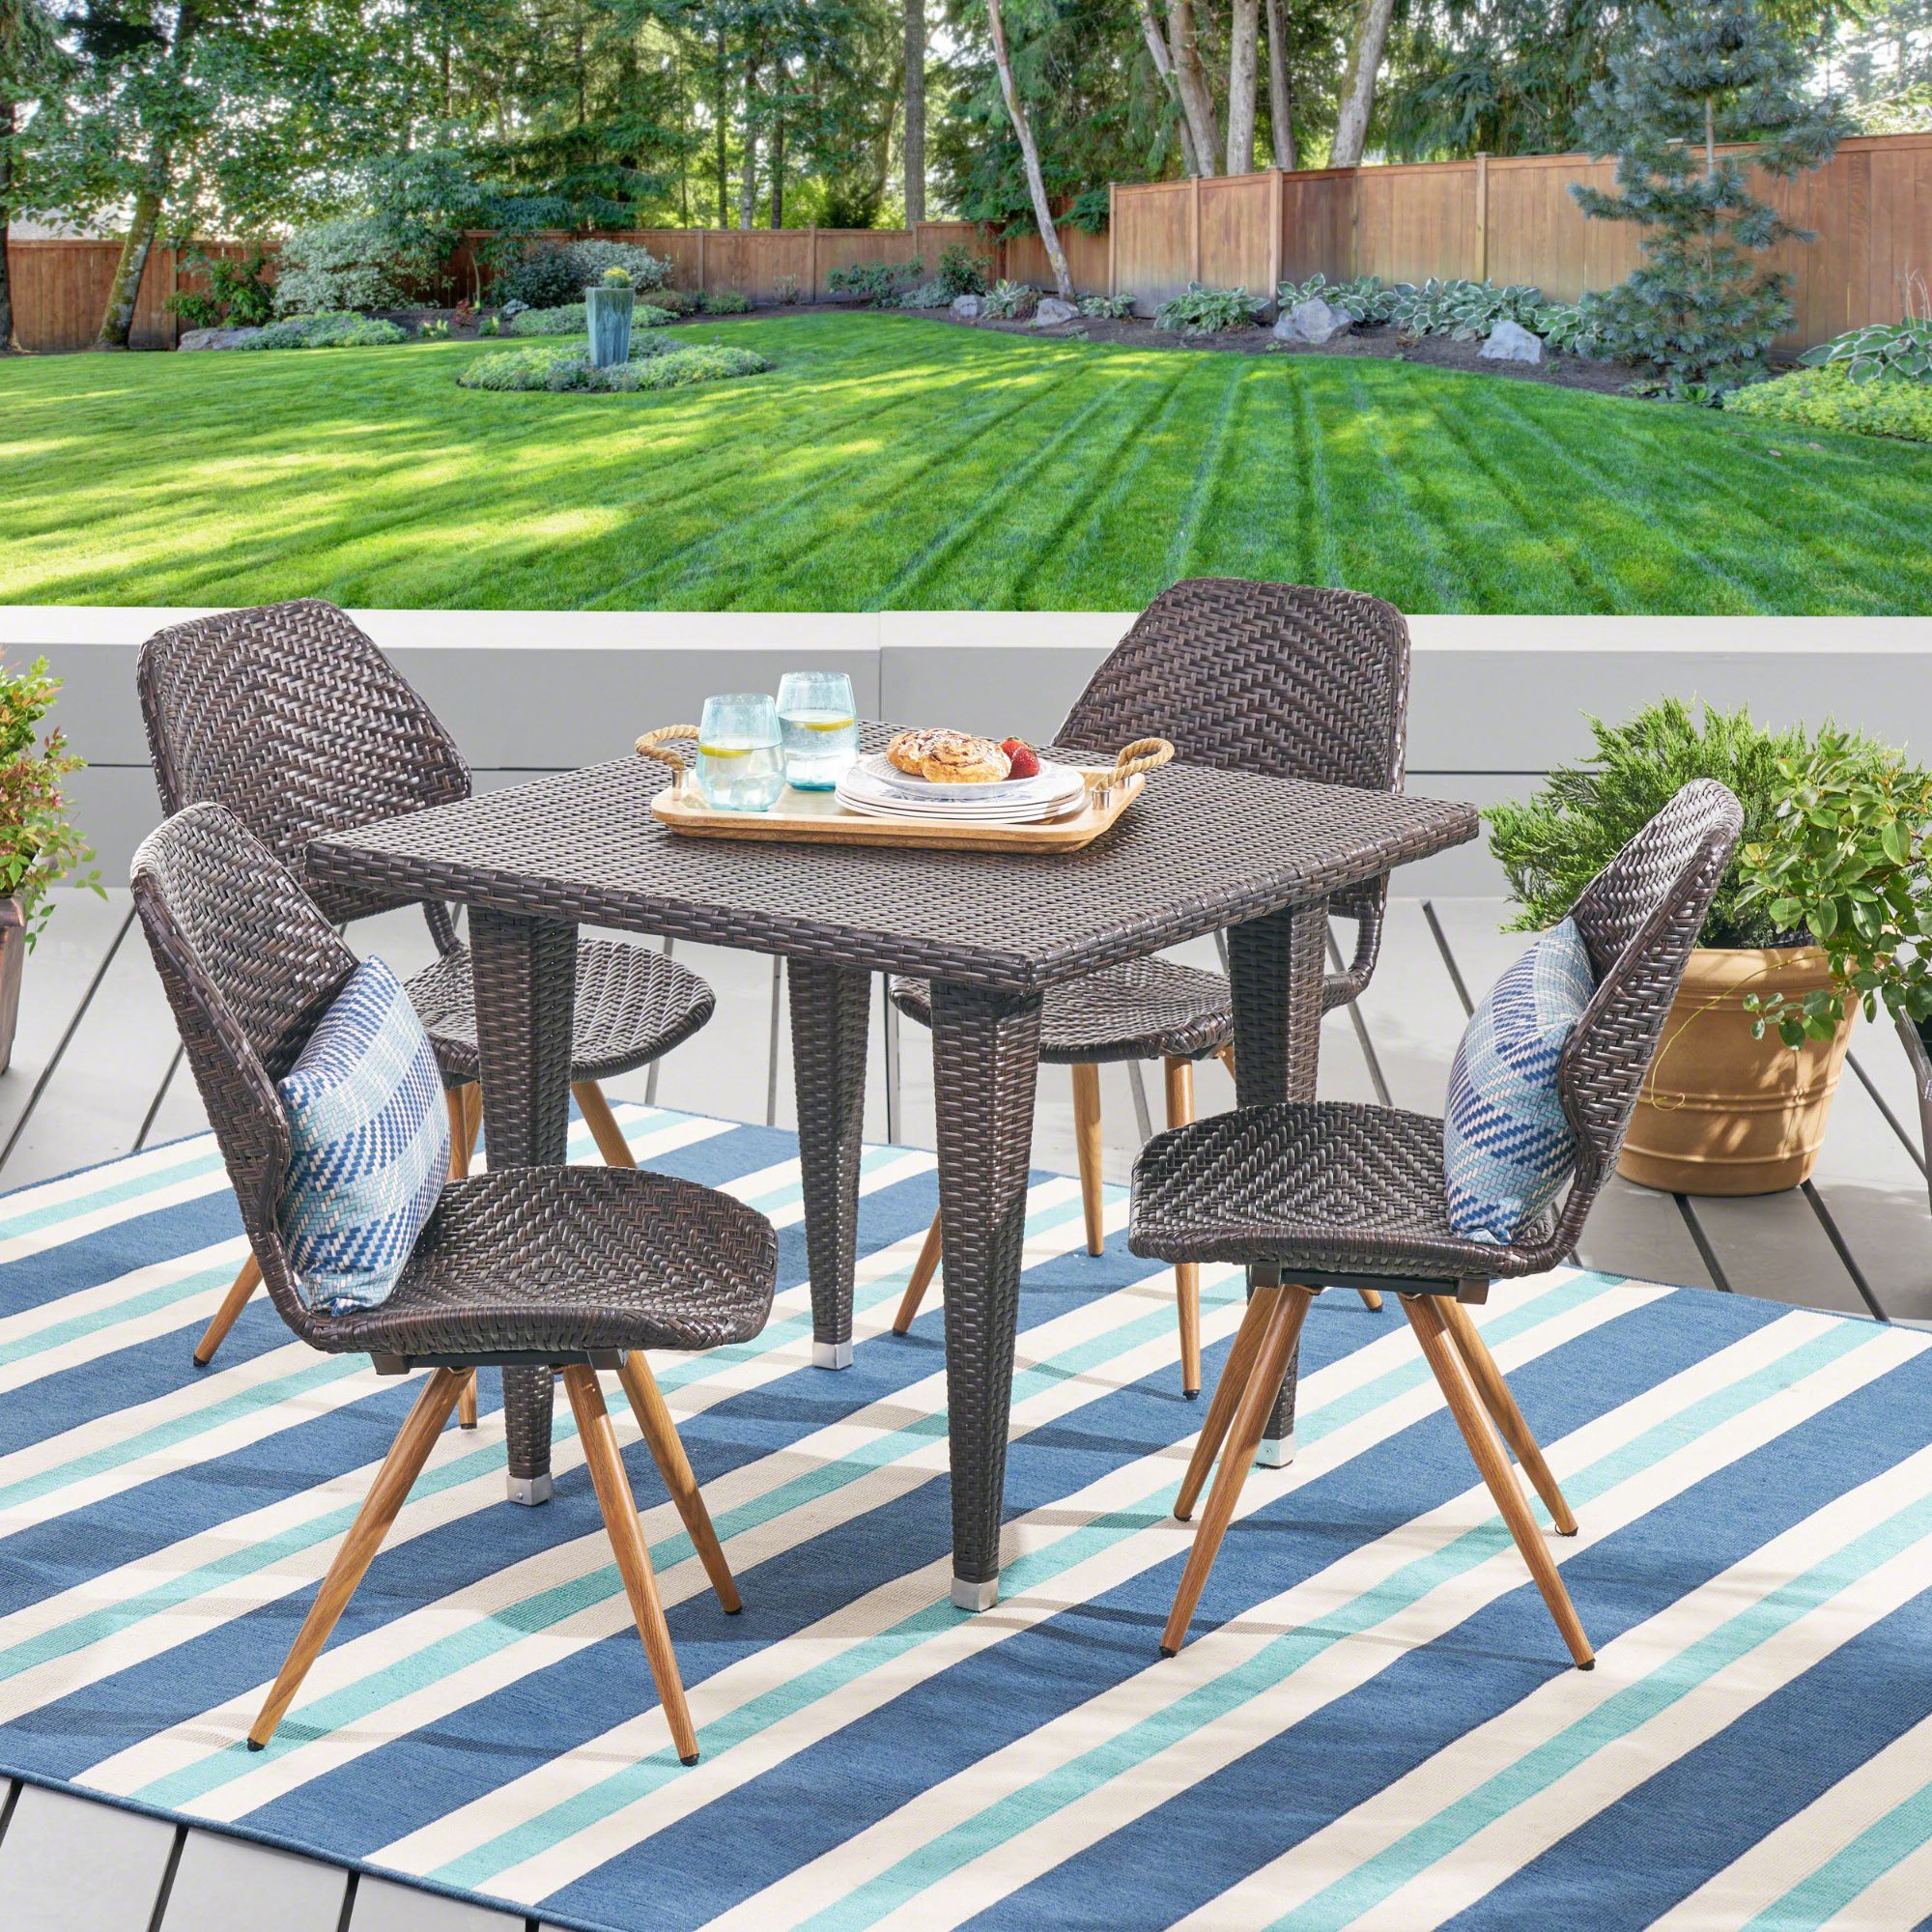 5 Piece Brown Finish Square Wicker Outdoor Furniture Patio Dining Set Pertaining To Latest 5 Piece Patio Sets (View 8 of 15)